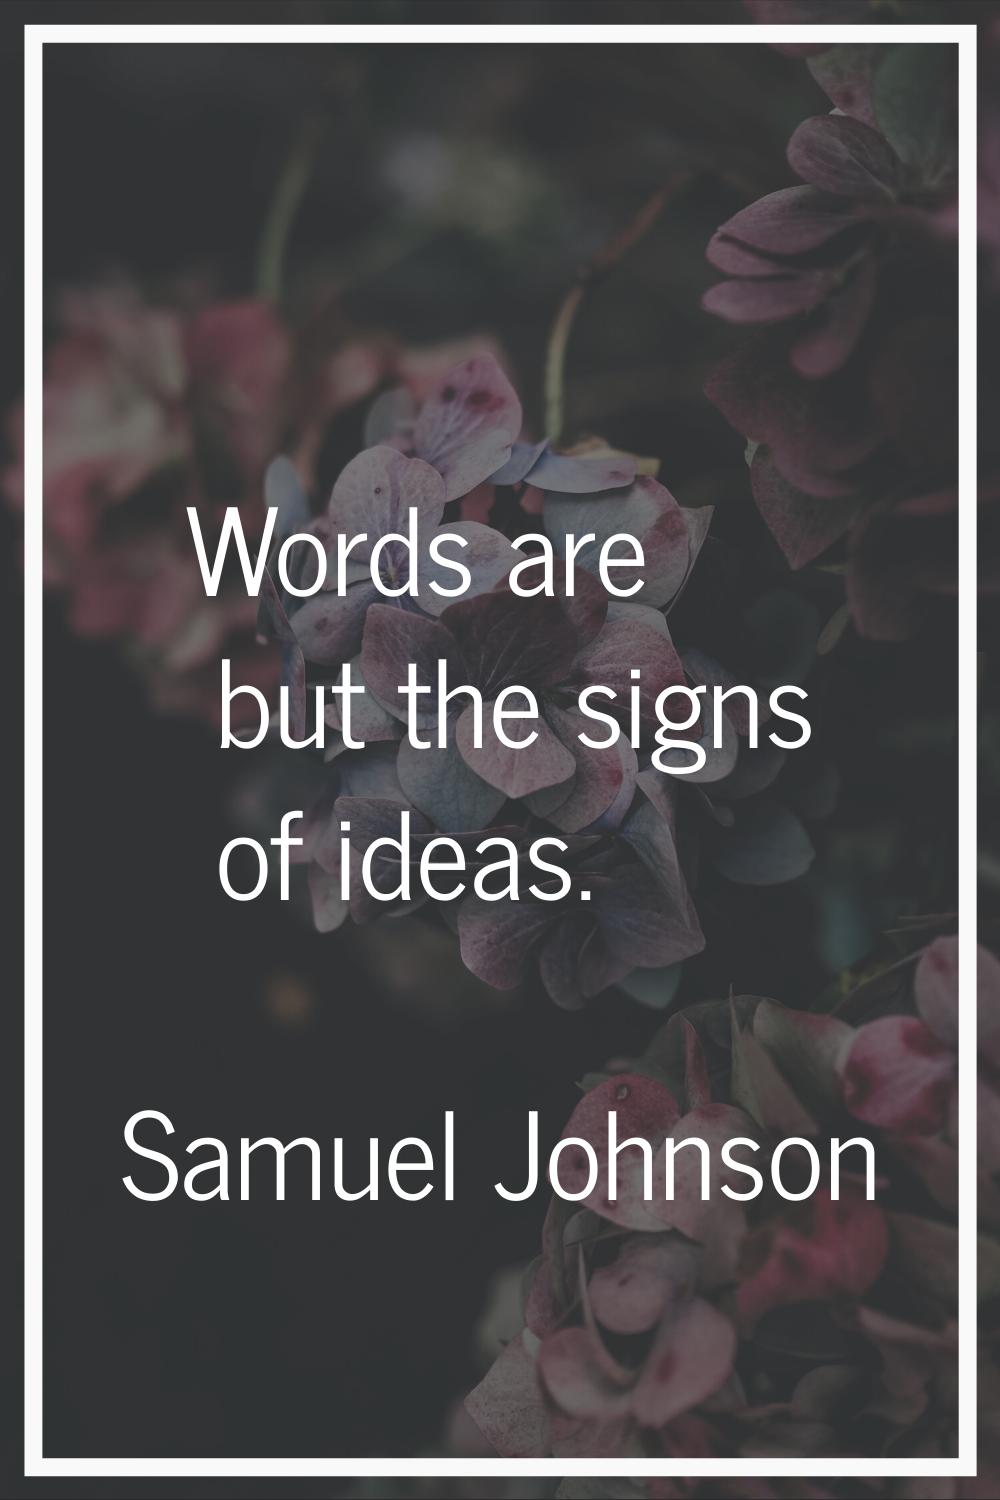 Words are but the signs of ideas.